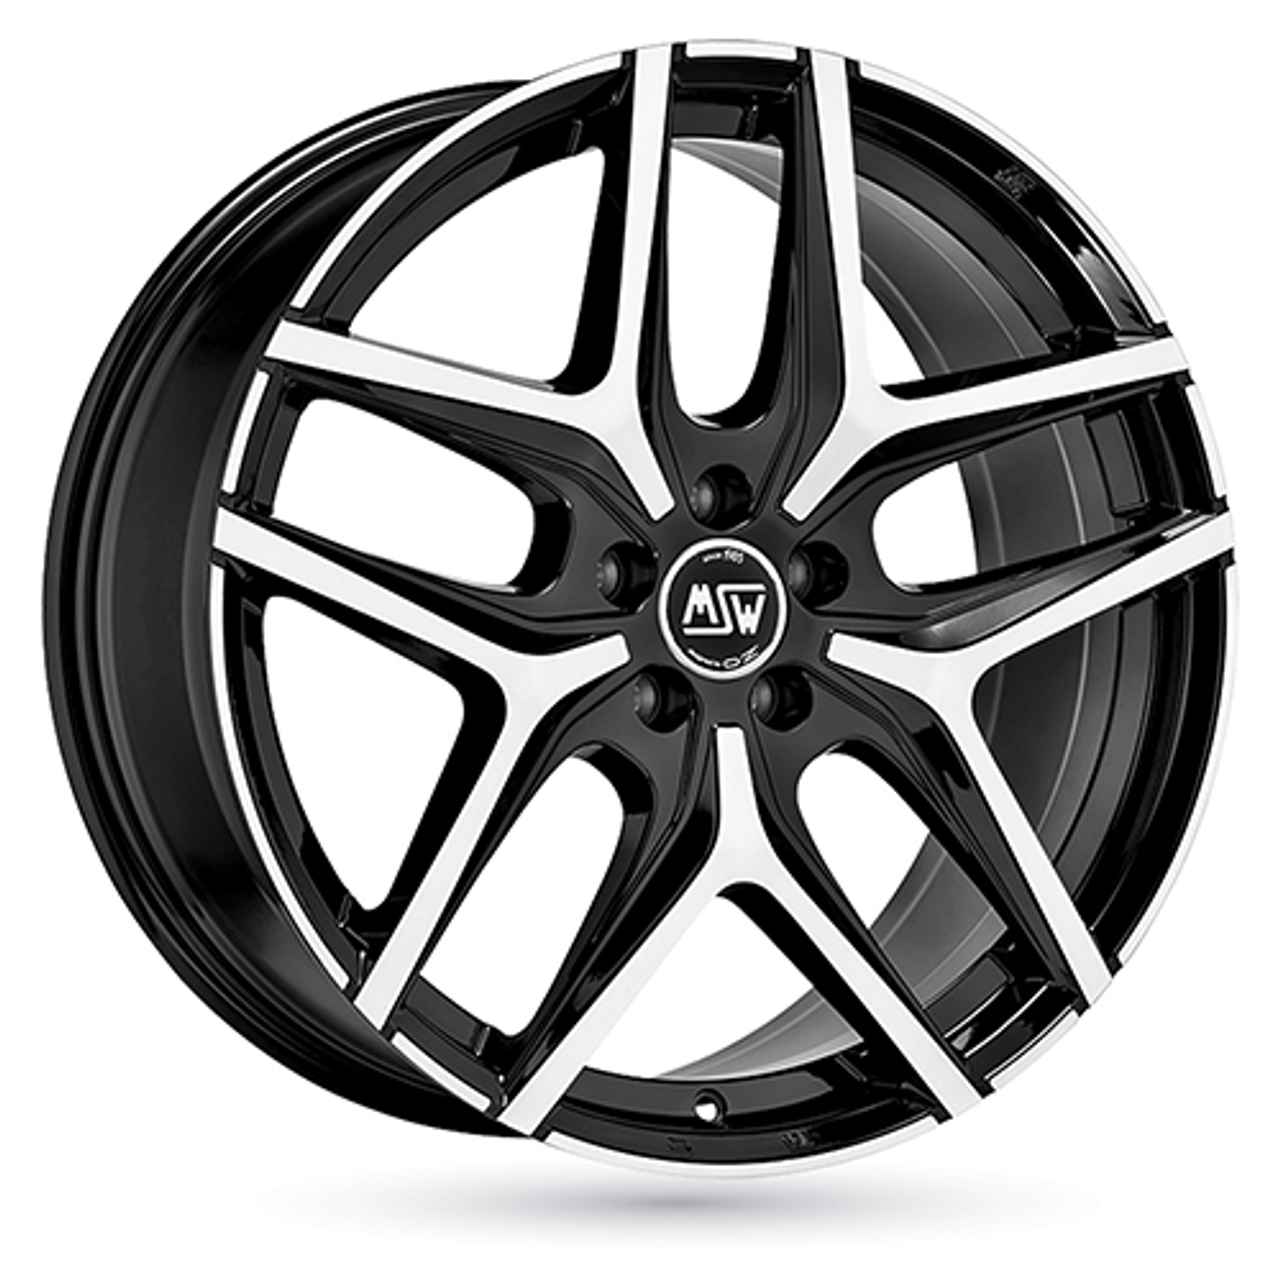 MSW (OZ) MSW 40 gloss black full polished 7.5Jx19 5x112 ET32